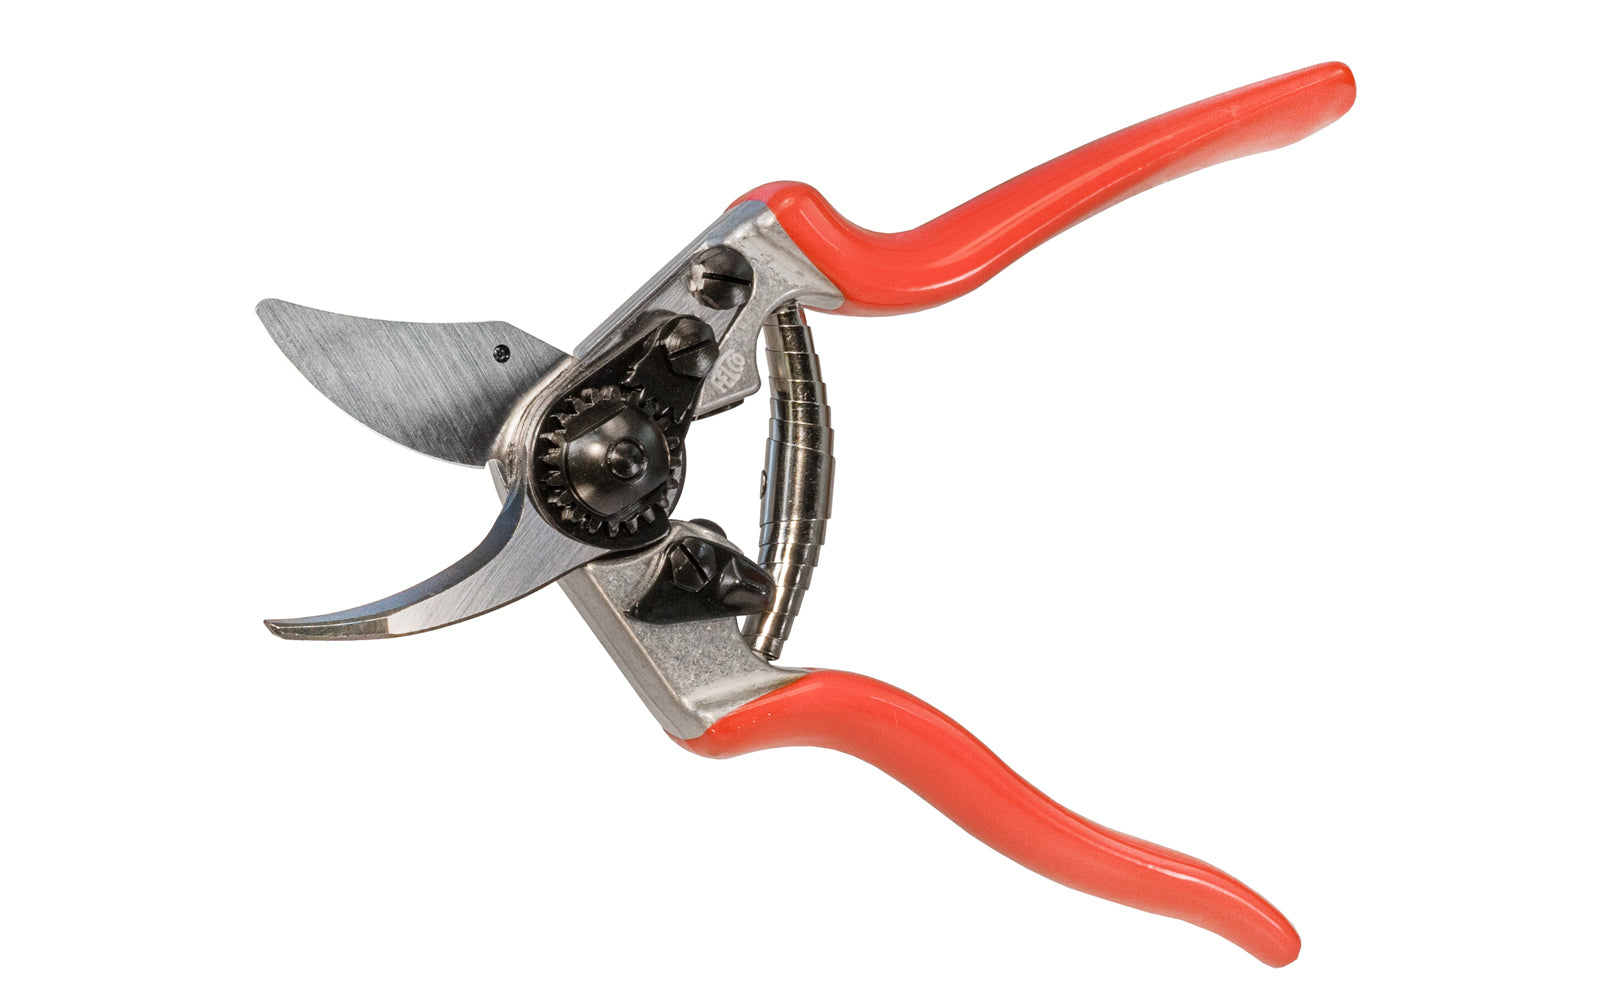 Made in Switzerland - Felco - Model 8 - Swiss Made Bypass pruner - Medium Hand Size - Pruning shears / secateurs have an ingenious design which makes them ideal for heavy-duty cutting tasks - Cutting diameter capacity 0.79" (20 mm) - Blade is made of high-quality hardened steel - Spring loaded - Vinyl coated handle - 783929100043